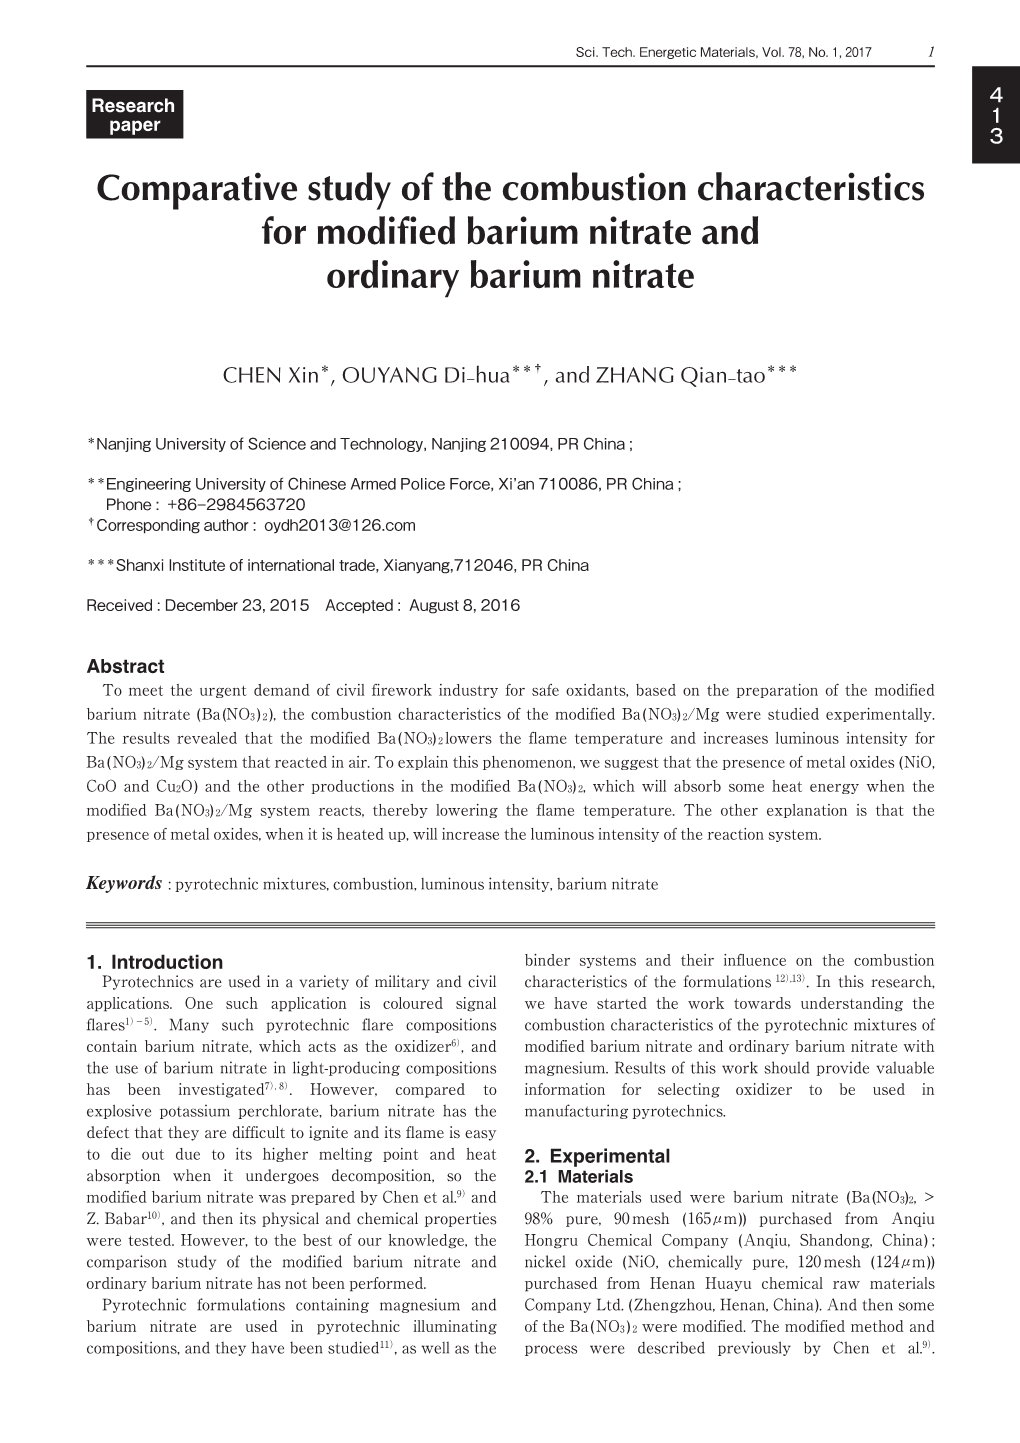 Comparative Study of the Combustion Characteristics for Modified Barium Nitrate and Ordinary Barium Nitrate